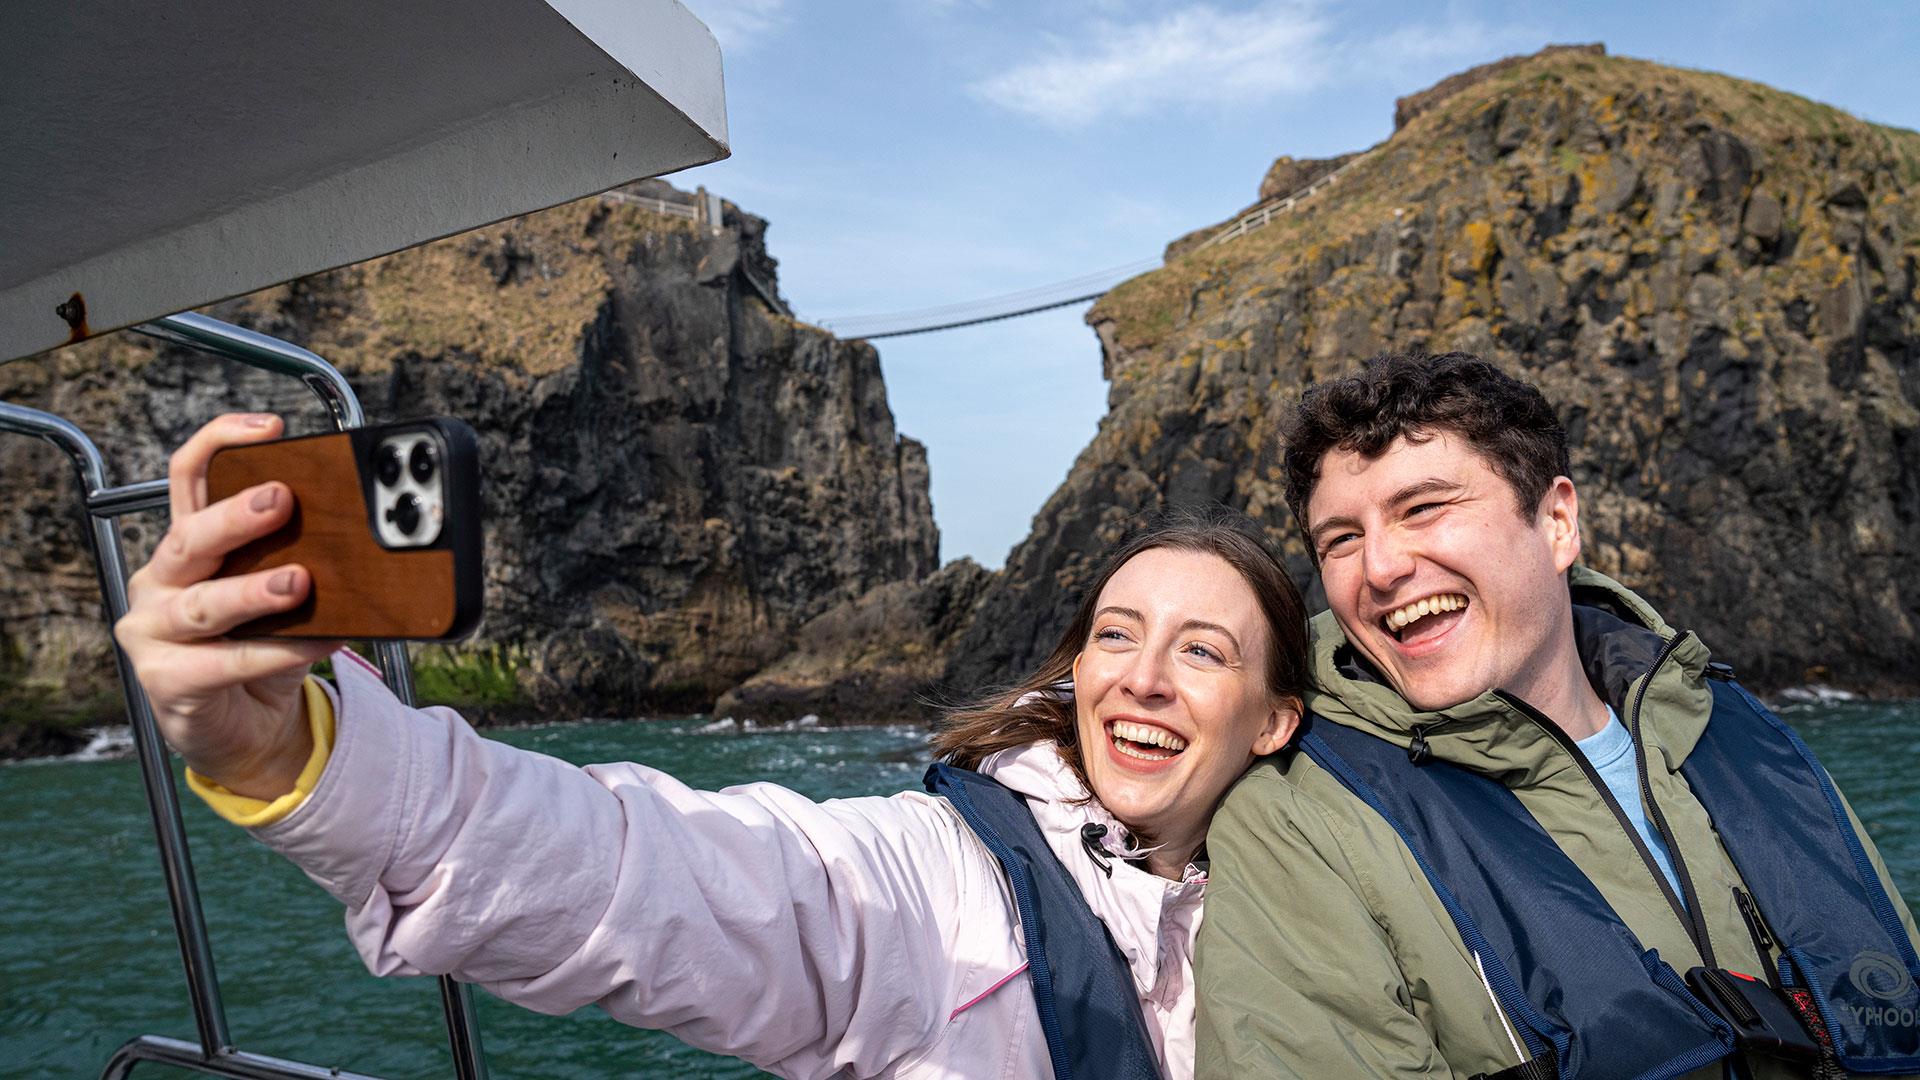 Couple on a boat taking a selfie and enjoying the Giant Shipwrecks of the North Coast experience with Carrick-A-Rede Rope Bridge in the background